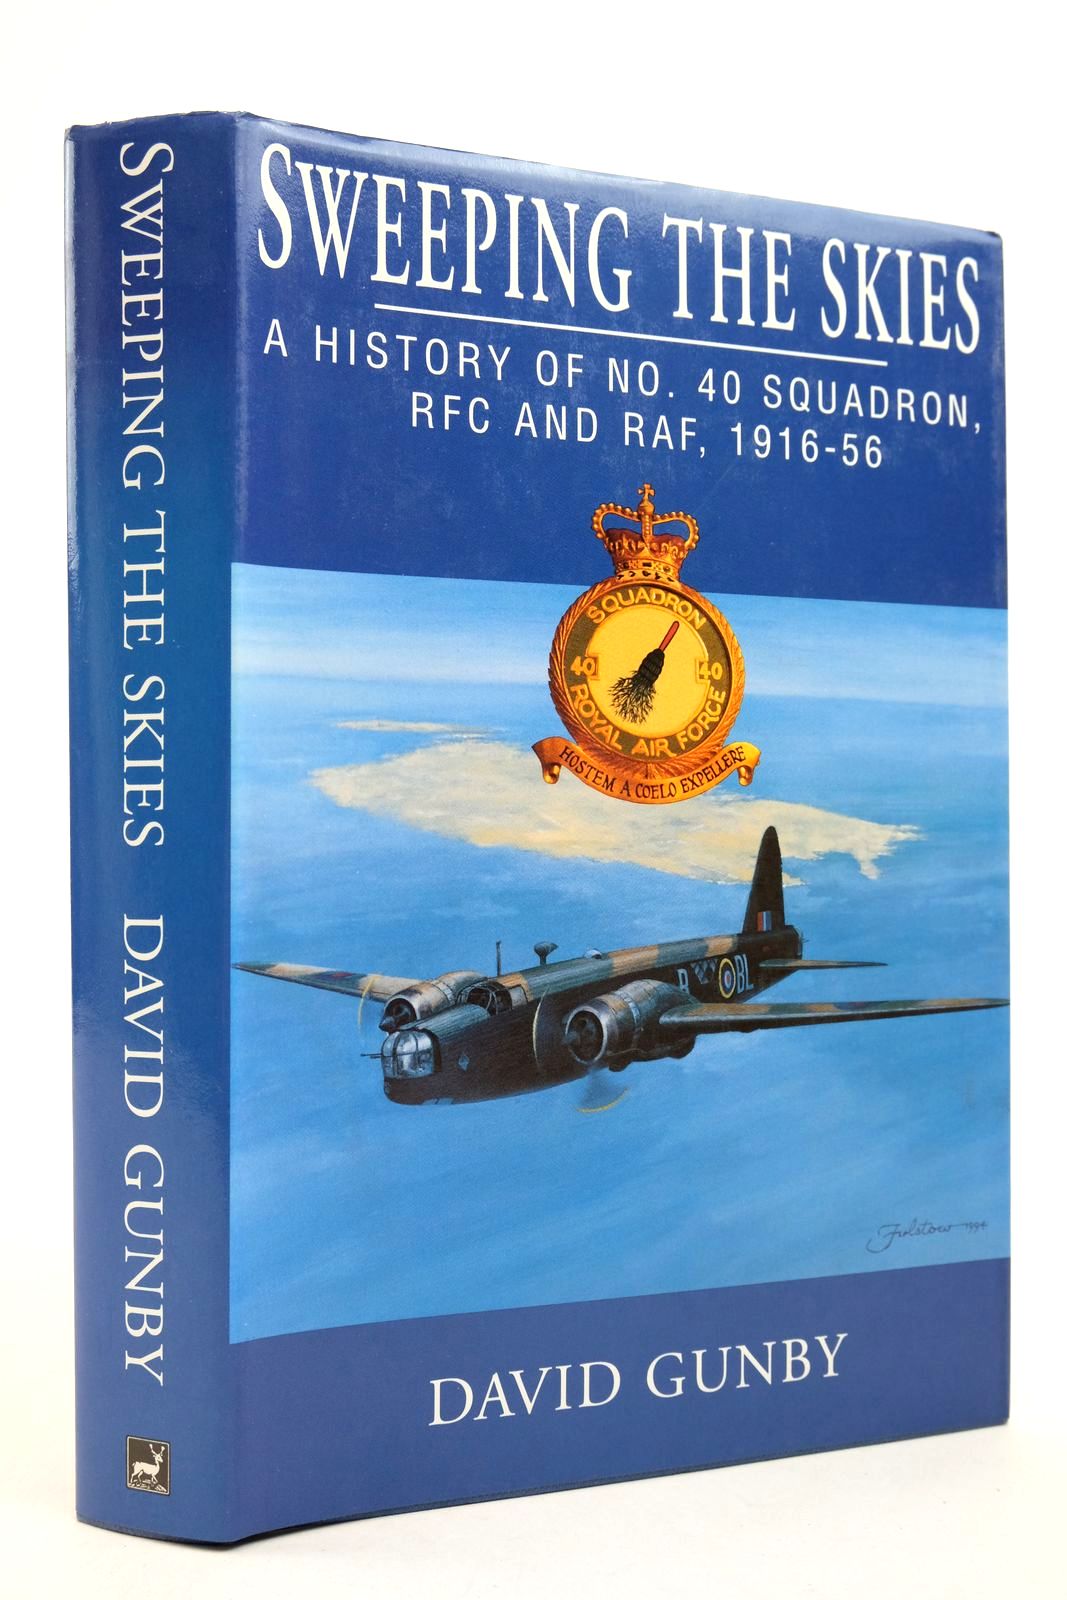 Photo of SWEEPING THE SKIES A HISTORY OF No. 40 SQUADRON, RFC AND RAF, 1916-56 written by Gunby, David published by The Pentland Press (STOCK CODE: 2139919)  for sale by Stella & Rose's Books